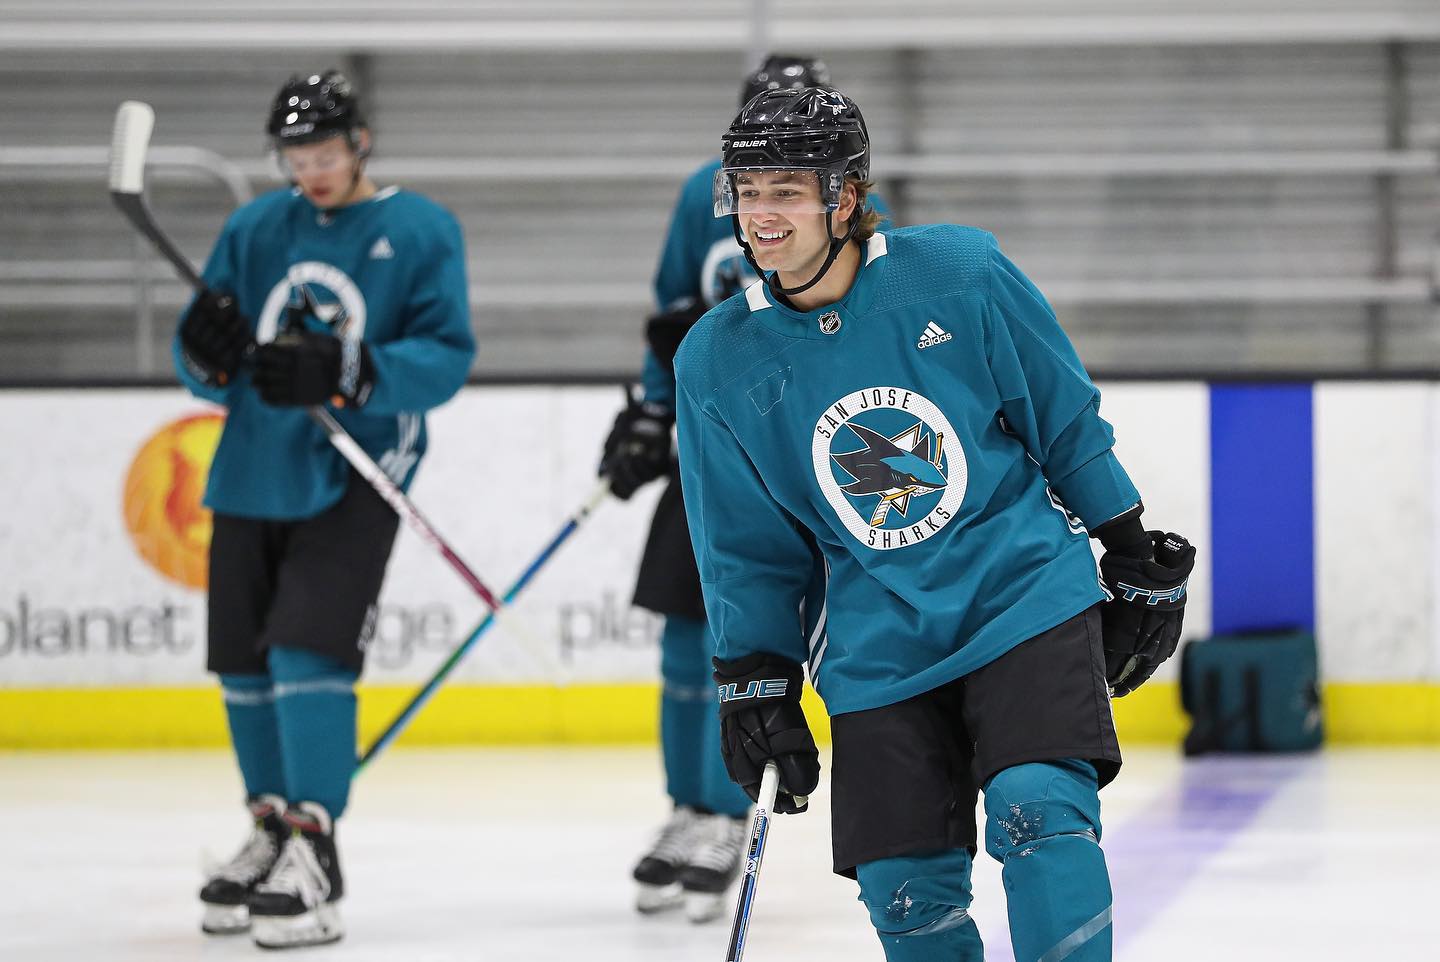 All smiles for day 1 of Development Camp...